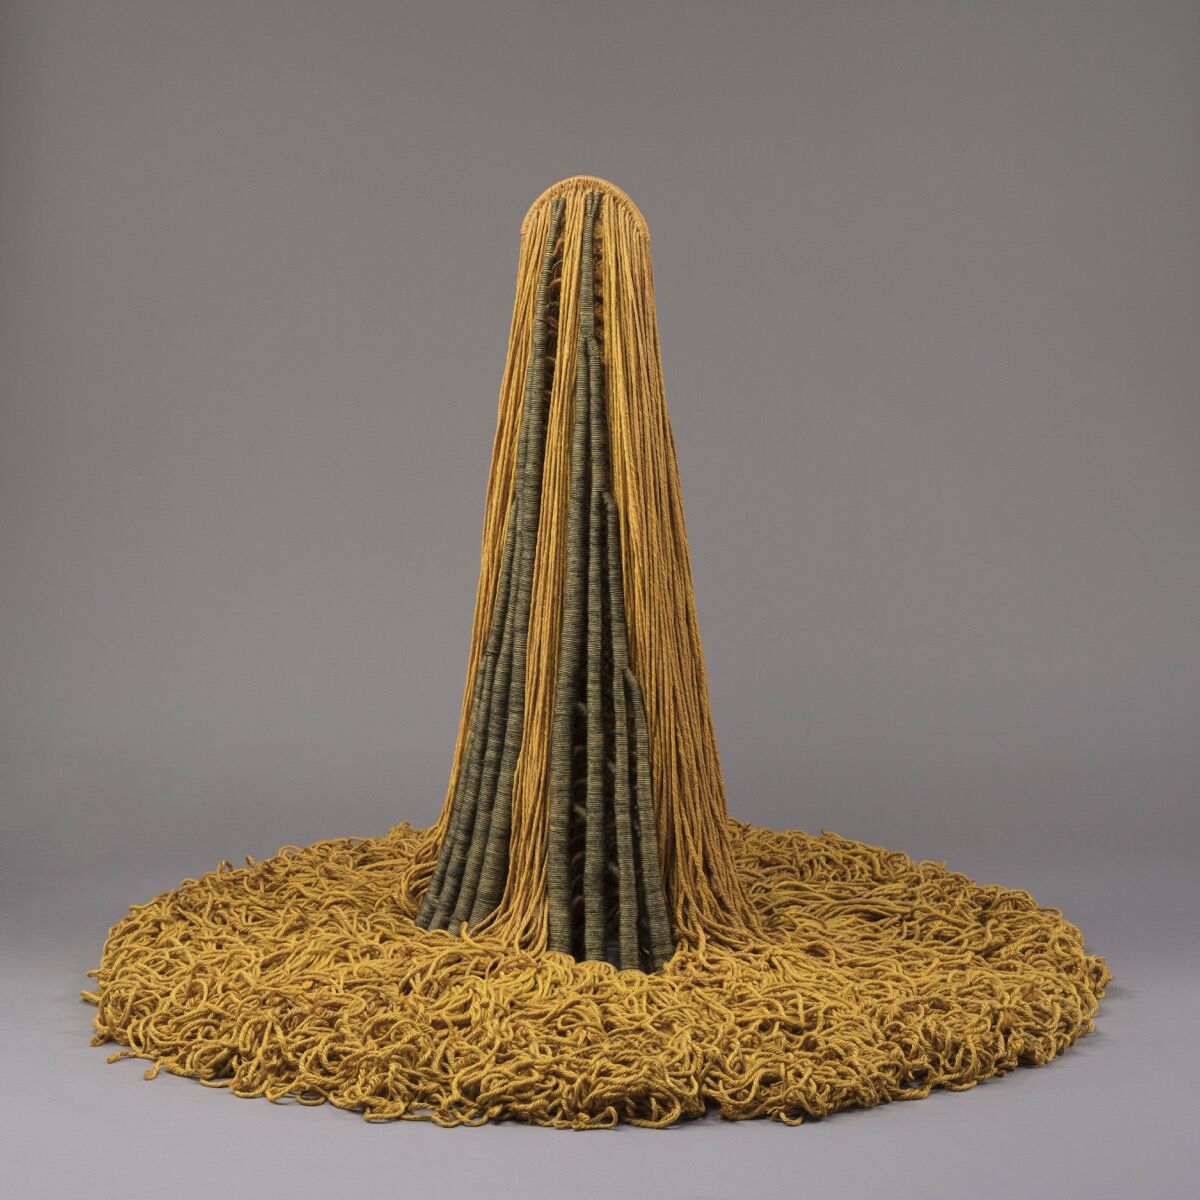 Claire Zeisler, Free Standing Yellow, 1968. Courtesy of the Art Institute of Chicago.